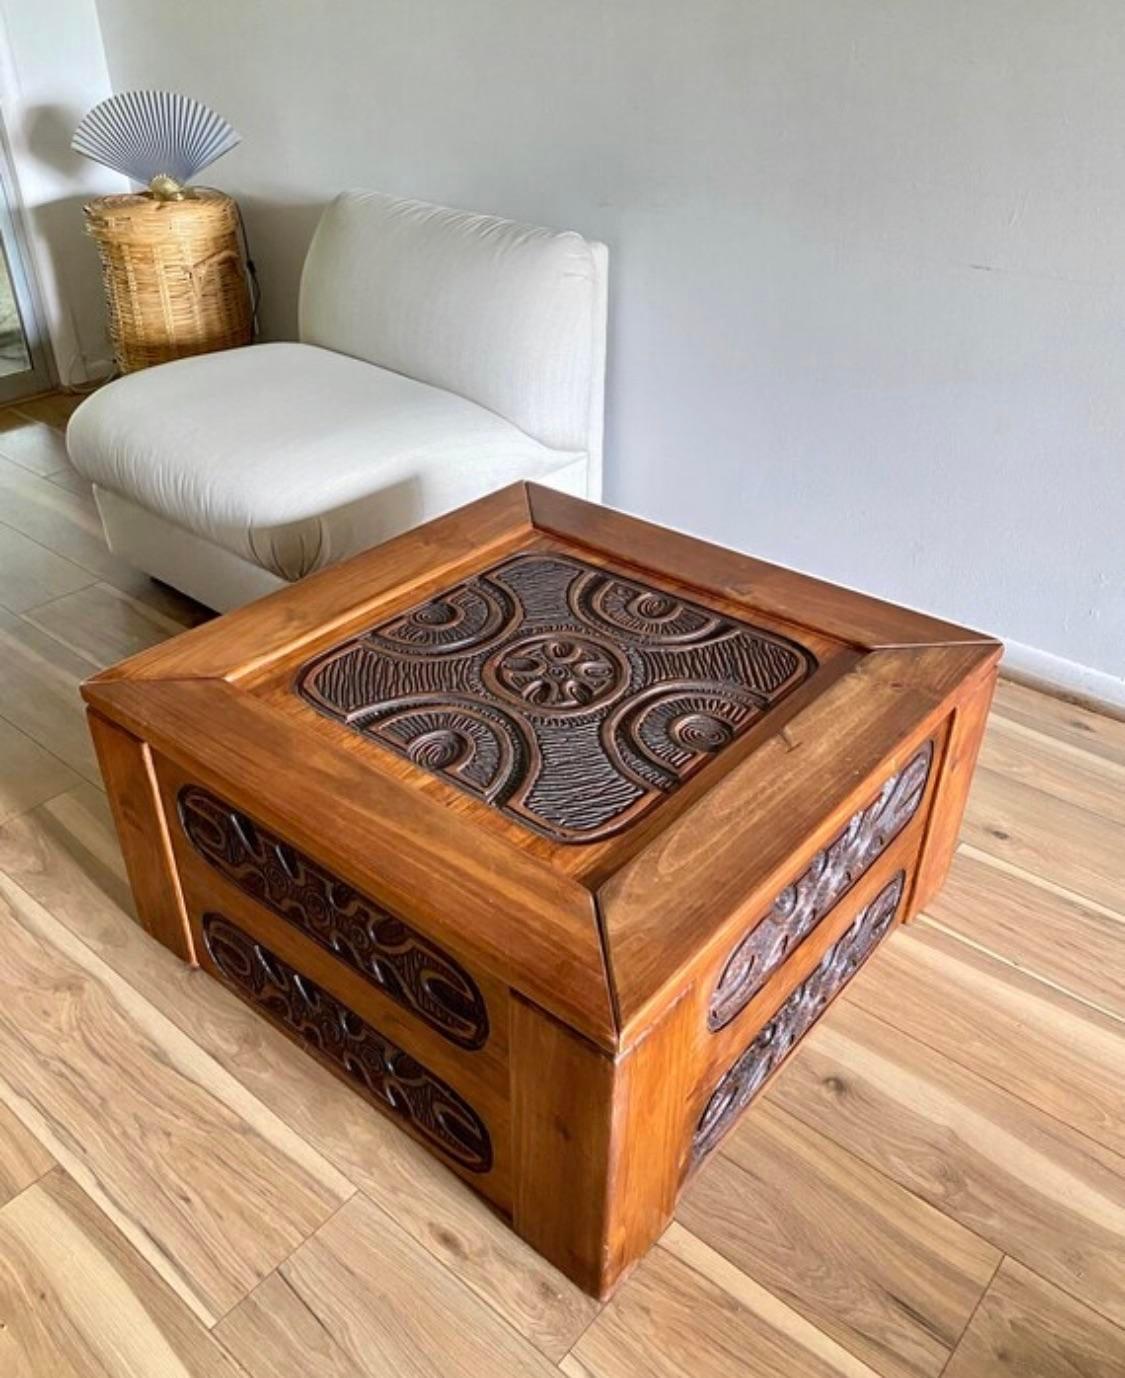 Introducing our Mexican Modern Carved Pine Wood Coffee Table, a stunning embodiment of mid-century design influenced by the iconic style of Evelyn Ackerman. Crafted in the 1970s, this exquisite piece captures the essence of the era with its unique